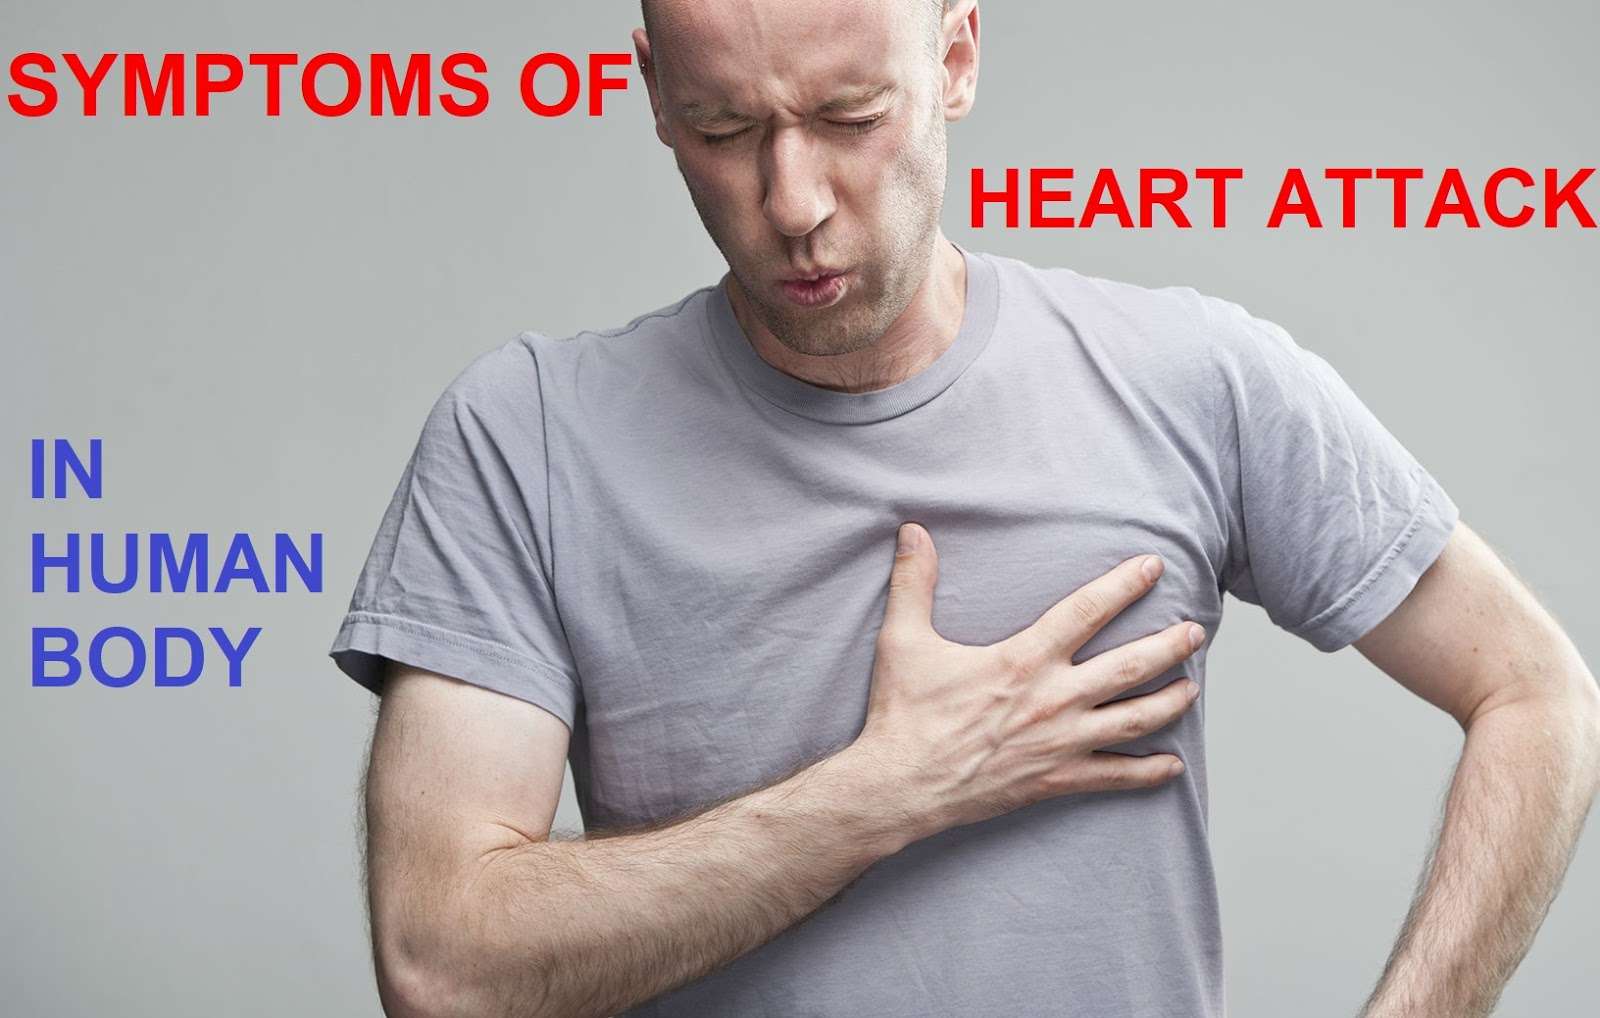 WHAT IS HEART ATTACK OR CHEST PAIN